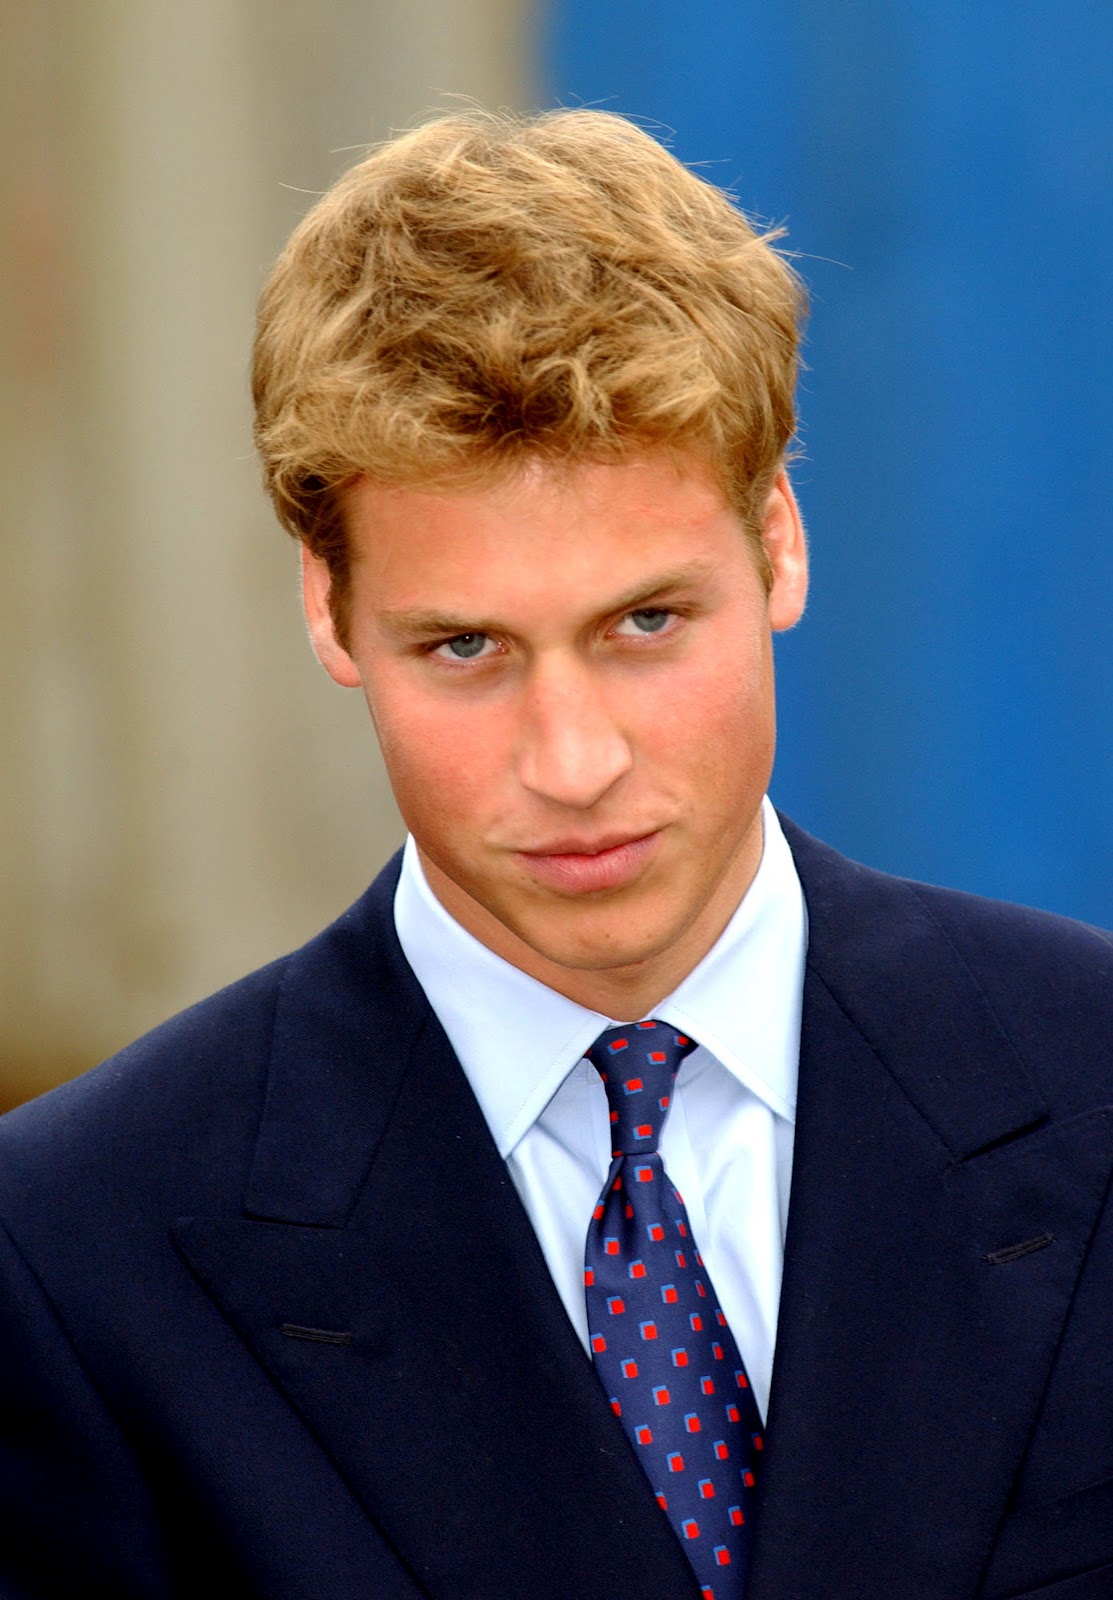 Prince William, Duke of Cambridge | HD Wallpapers (High Definition